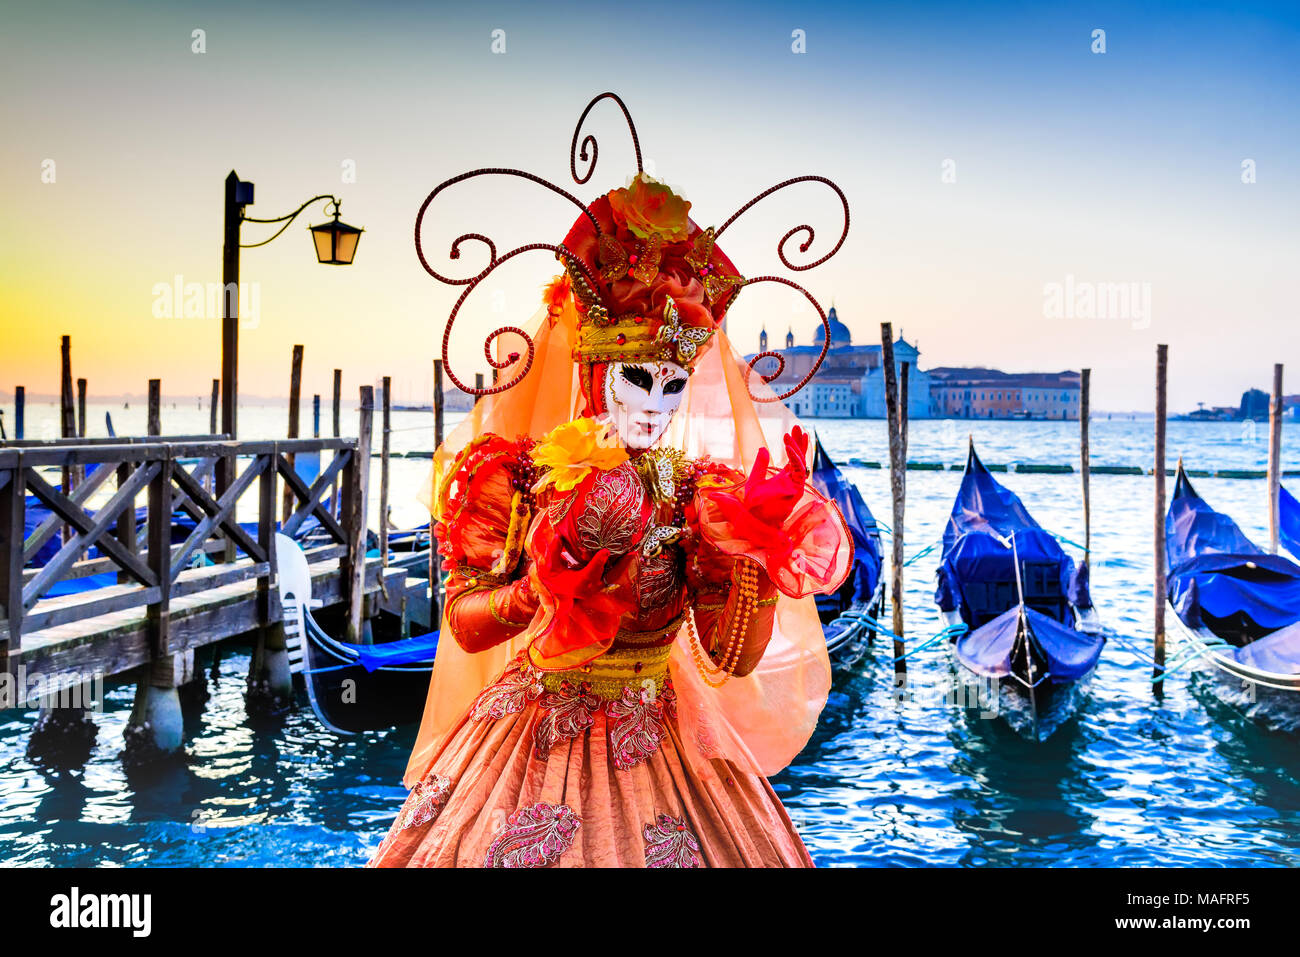 Venice, Italy - 9th February 2018: Carnival of Venice, beautiful mask at Piazza San Marco with gondolas and Grand Canal. Stock Photo